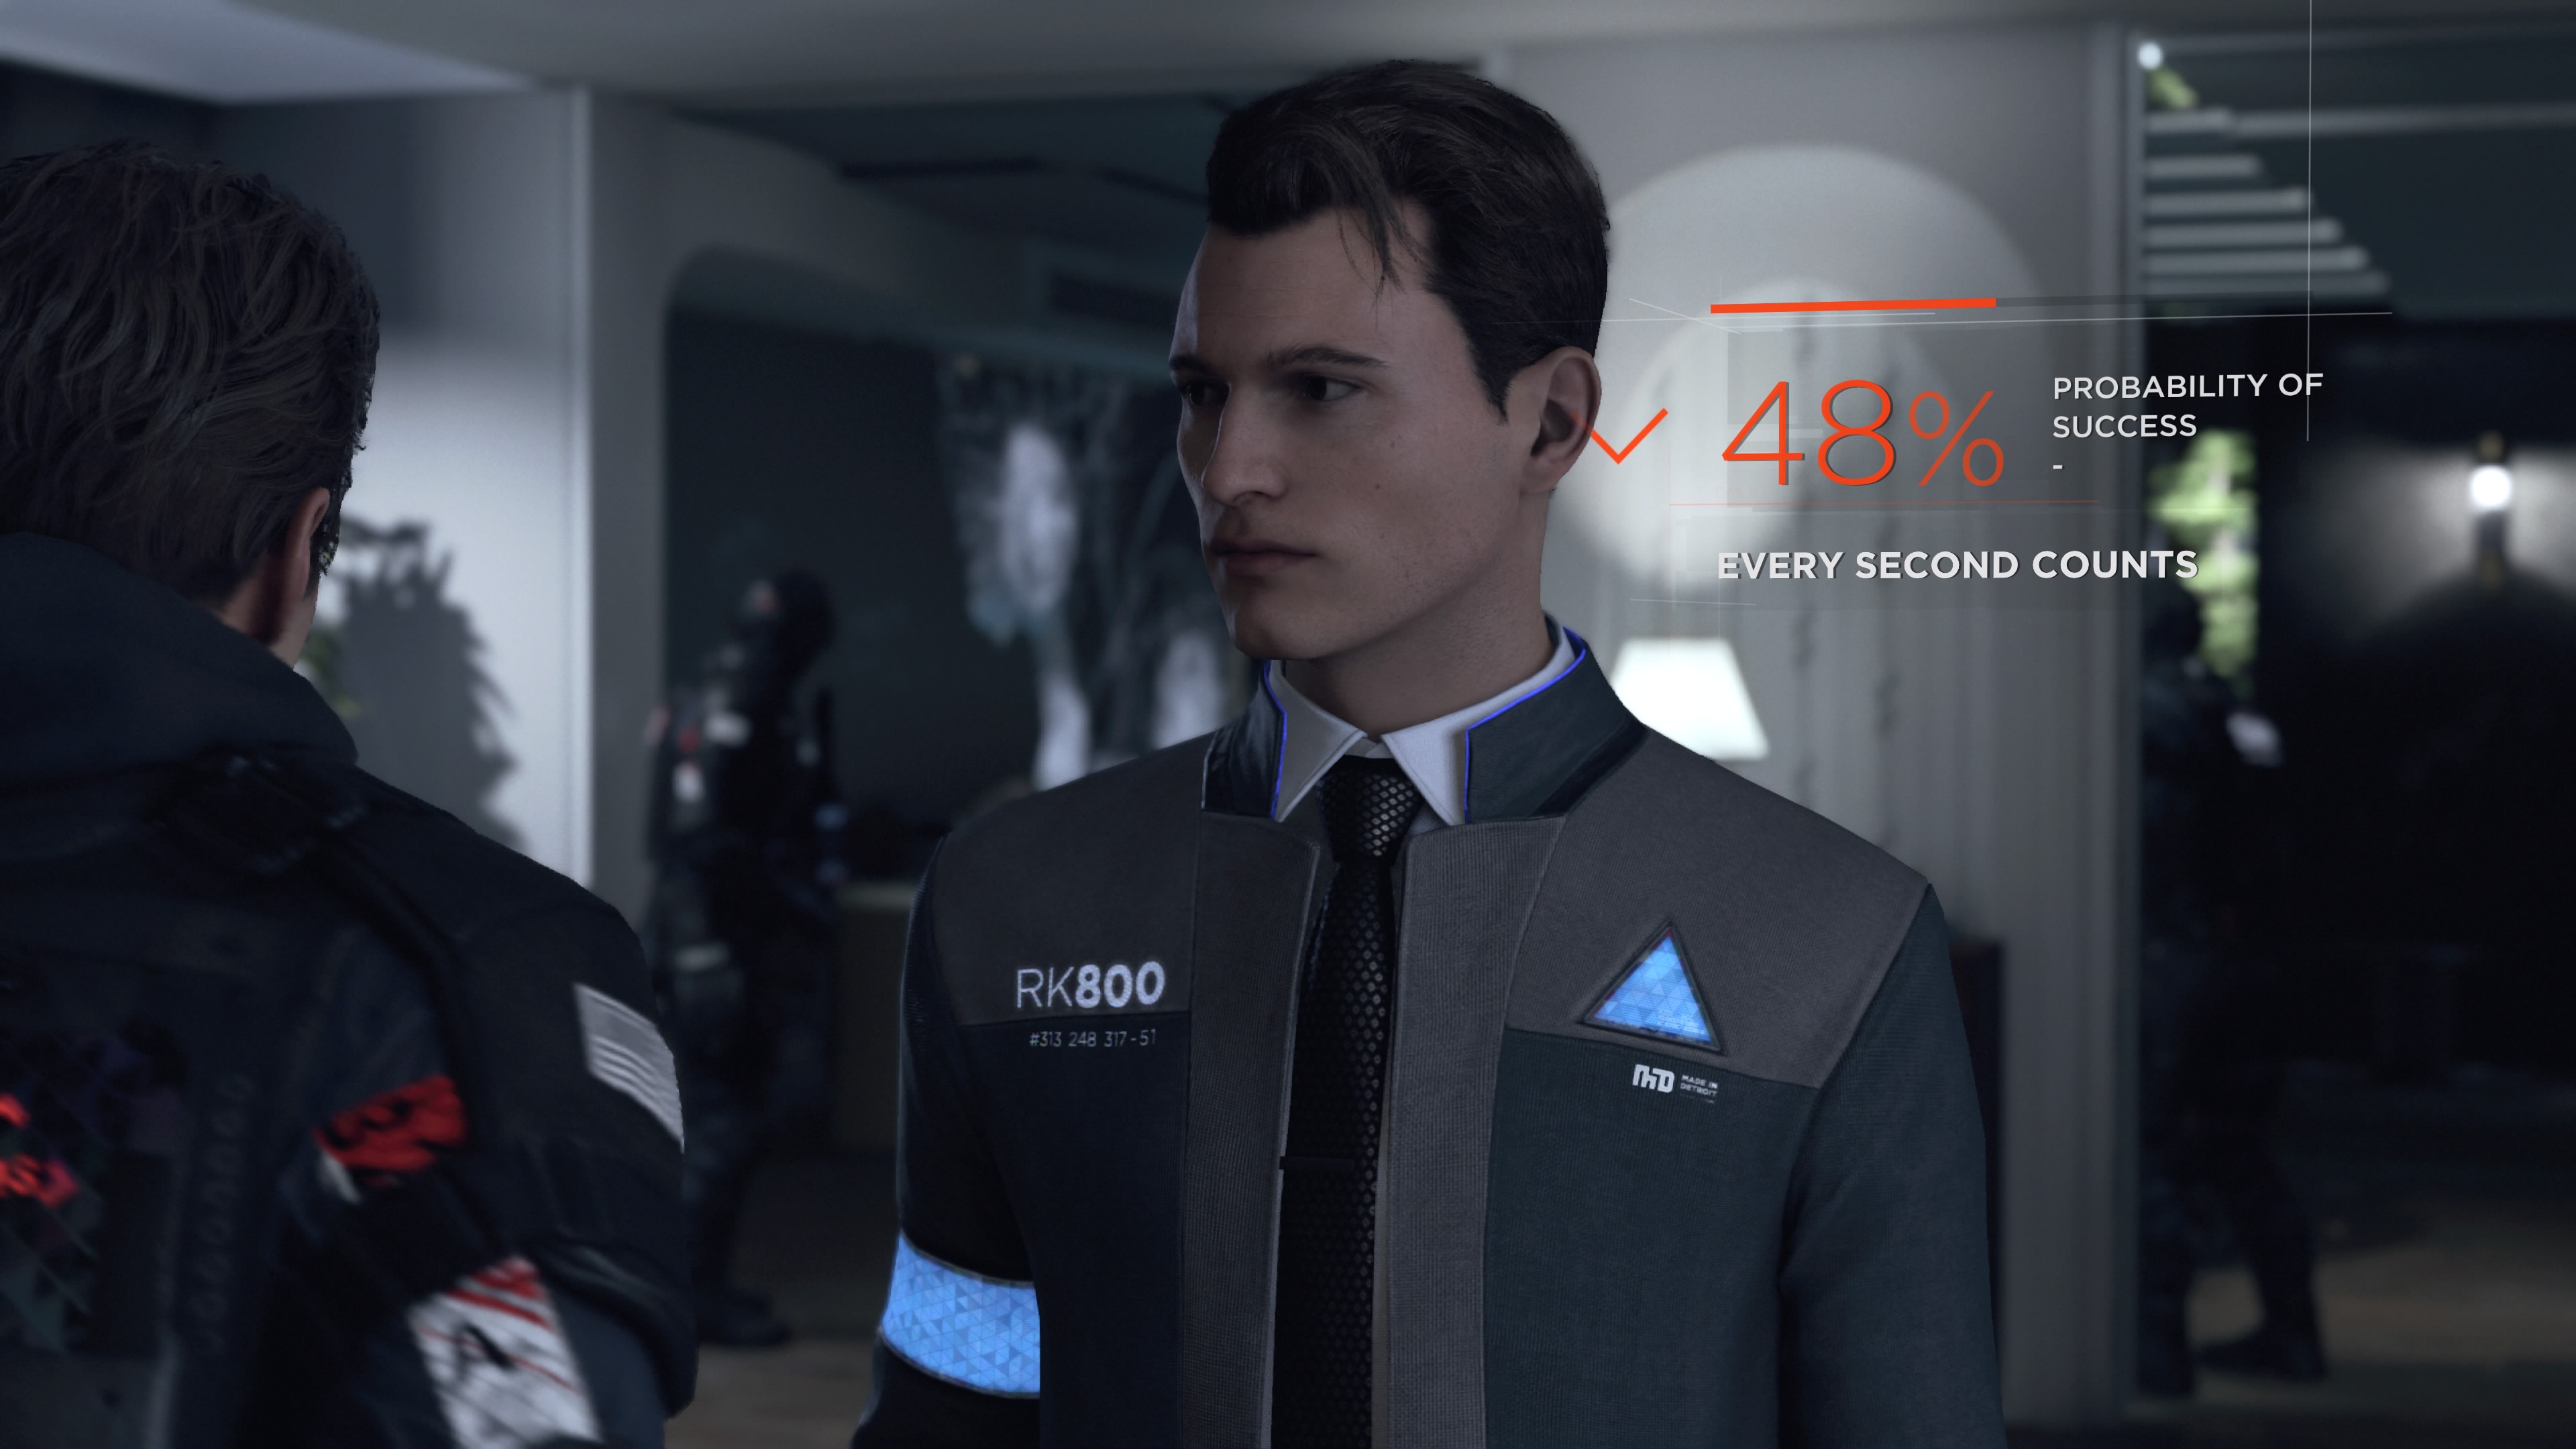 Detroit: Become Human review – meticulous multiverse of